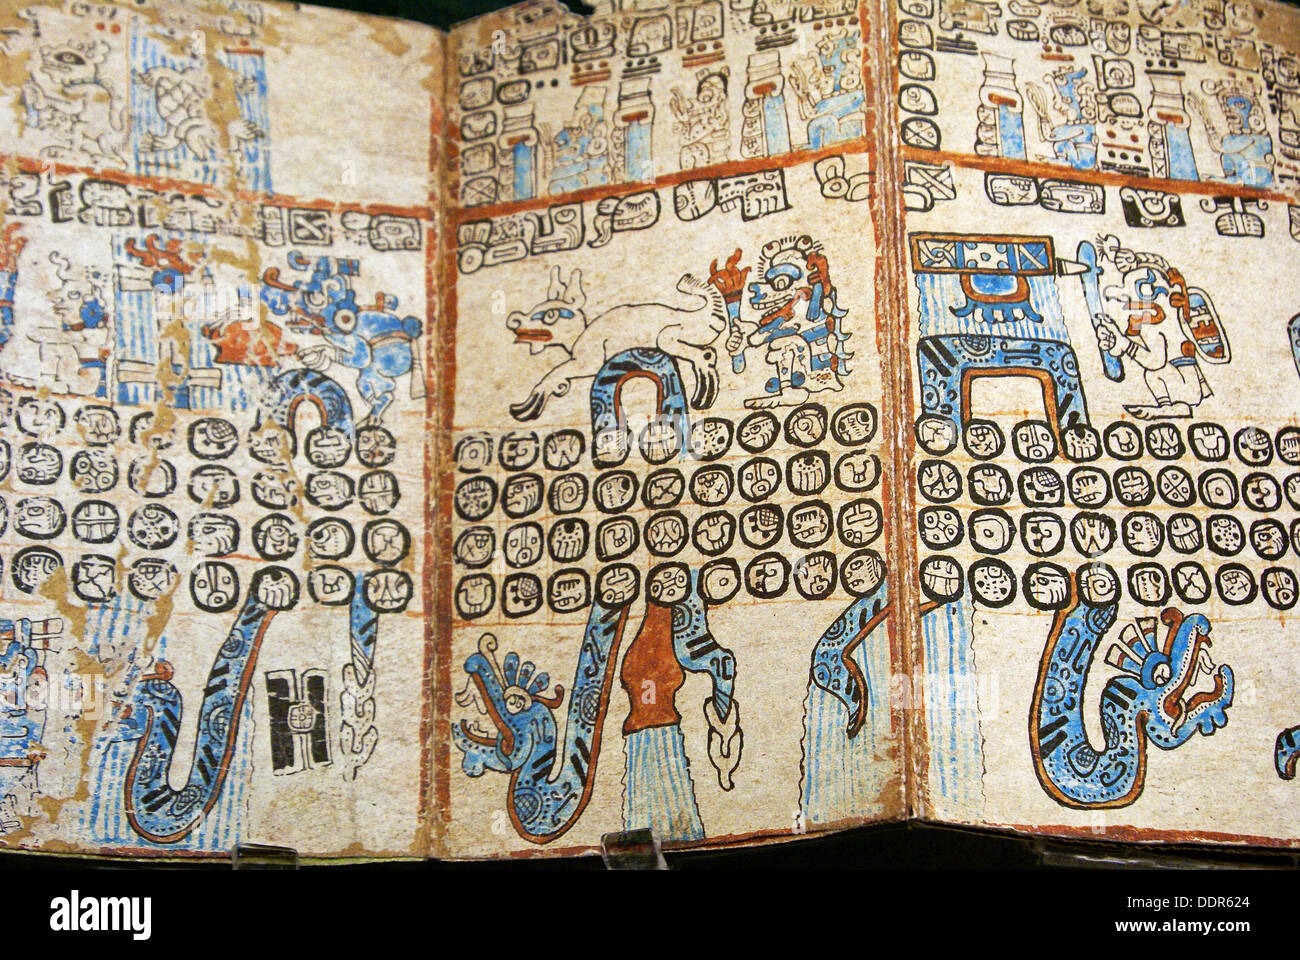 Grolier codex. Maya civilization. National Museum of Anthropology, Mexico D.F. Mexico. Stock Photo